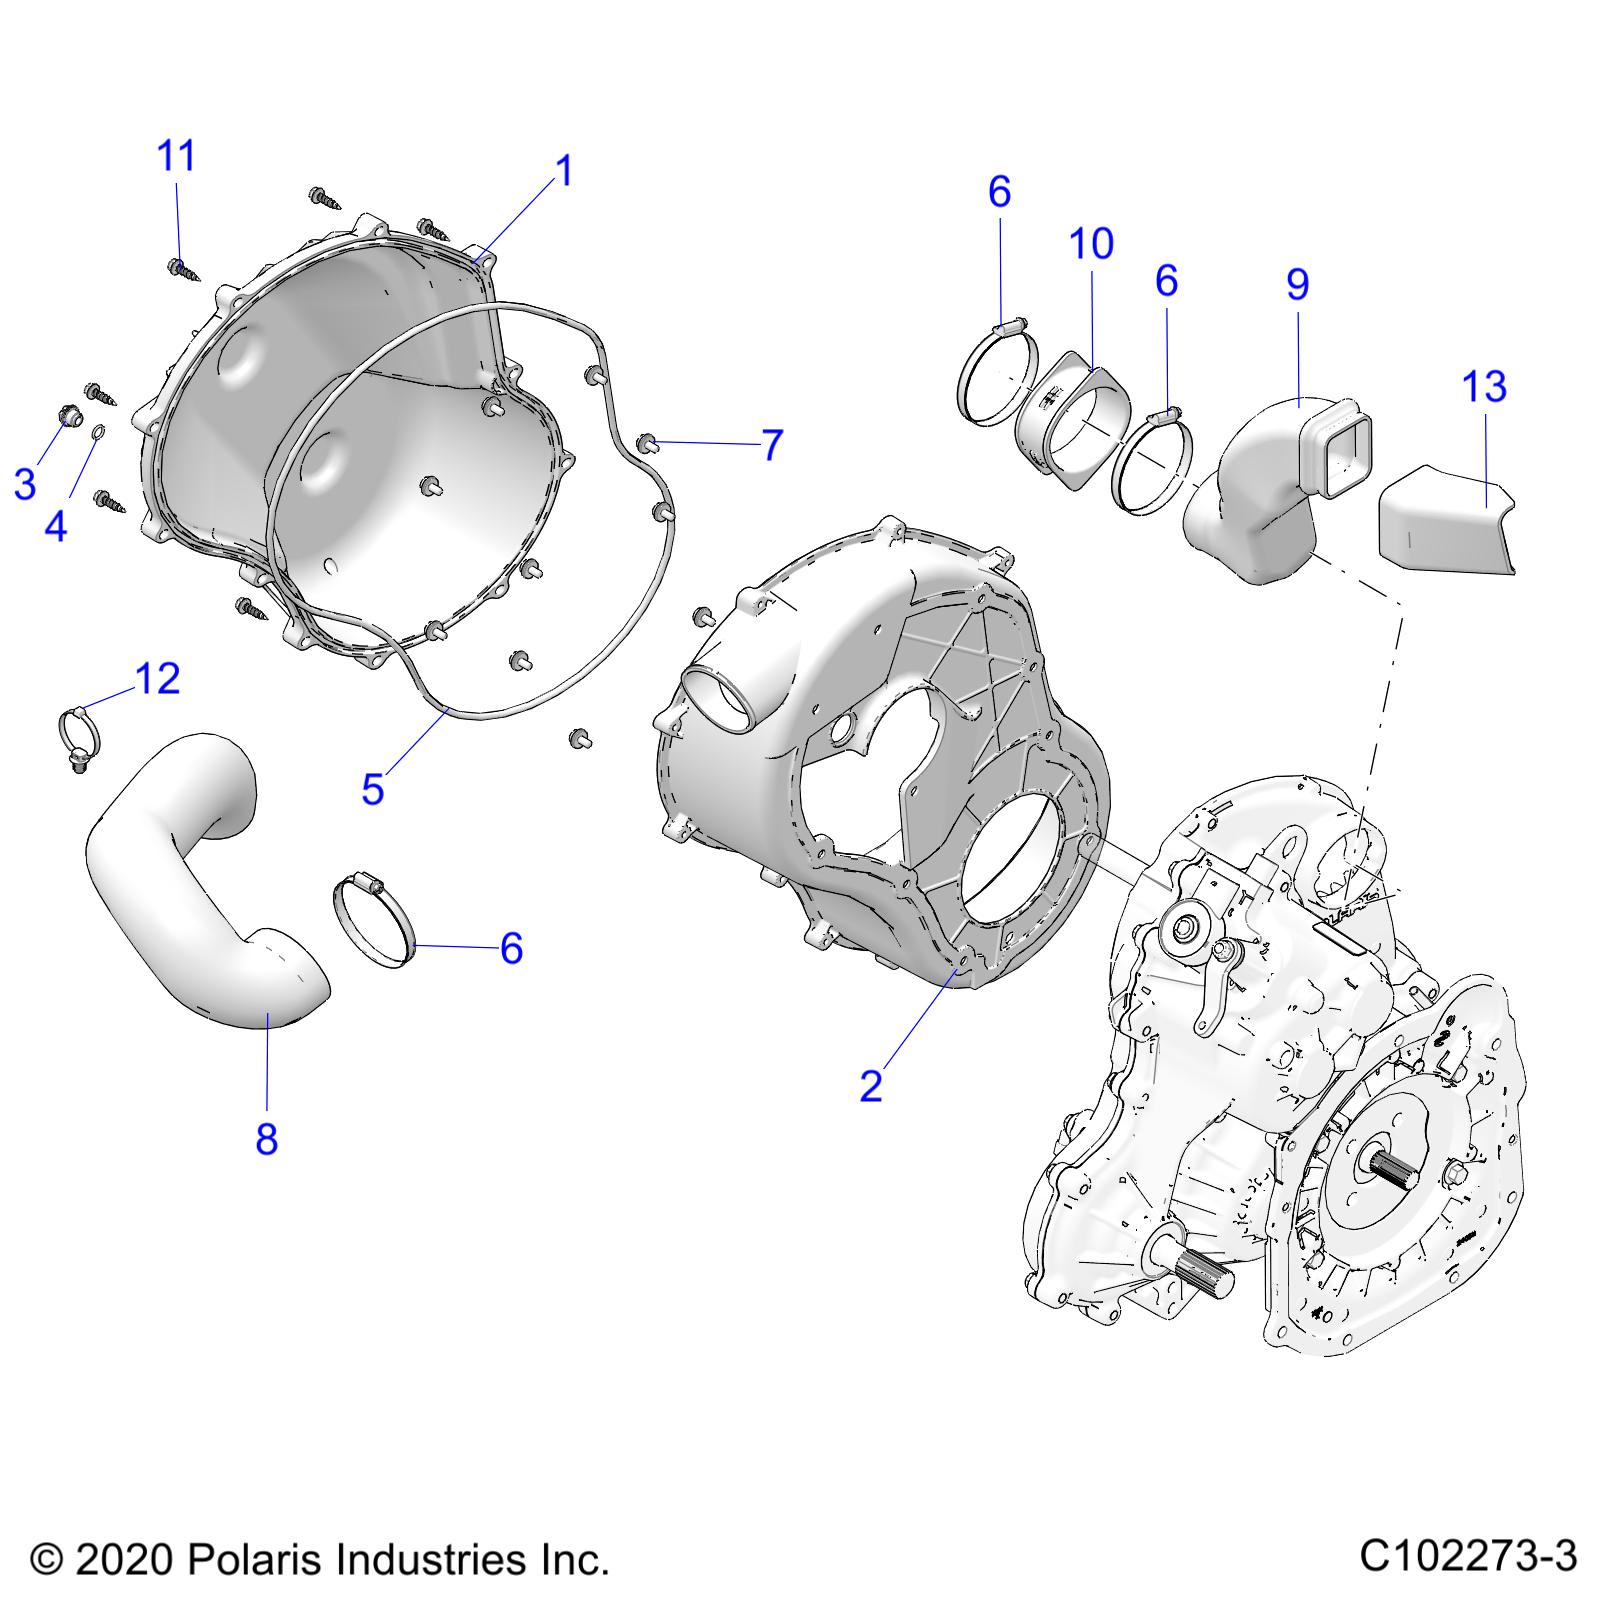 Part Number : 5415638 CLUTCH-OUTLET TRG